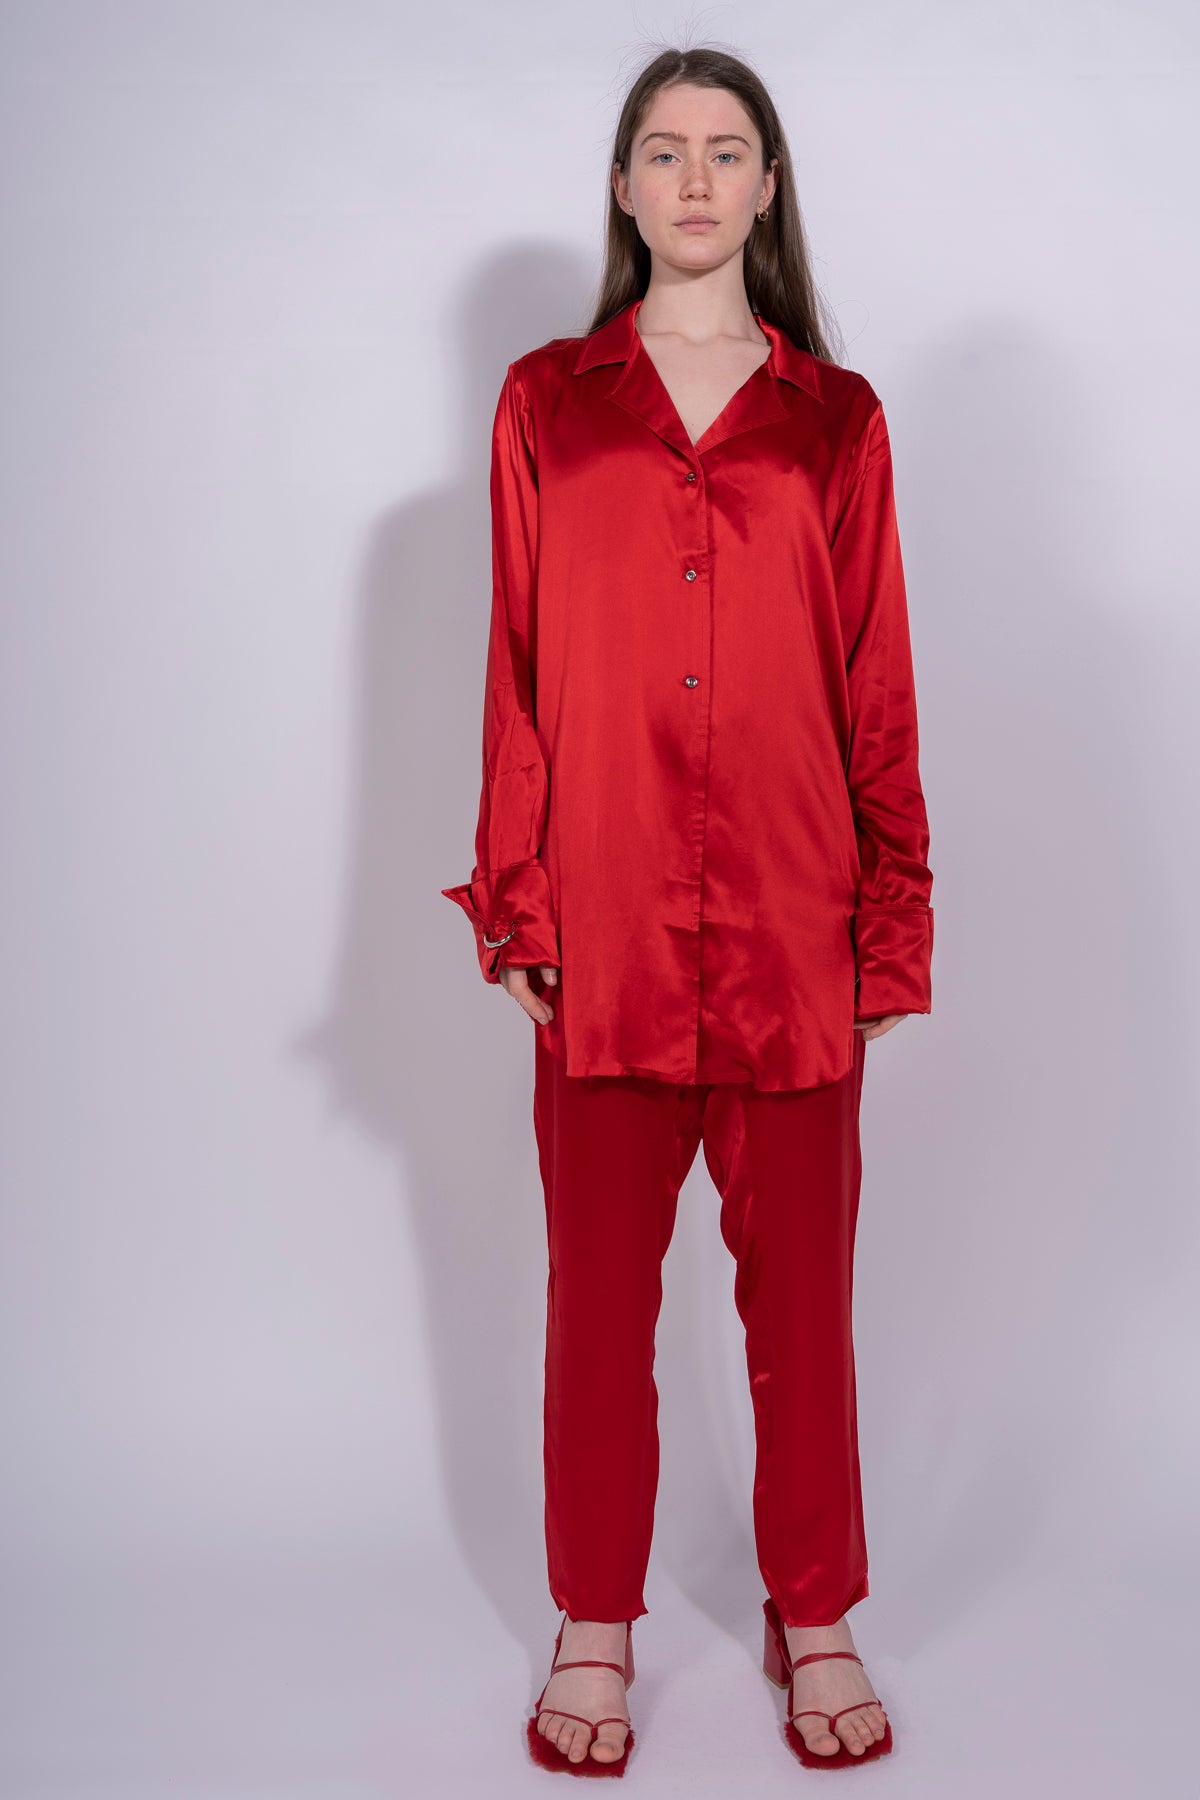 PYJAMA BLOUSE IN RED marques almeida